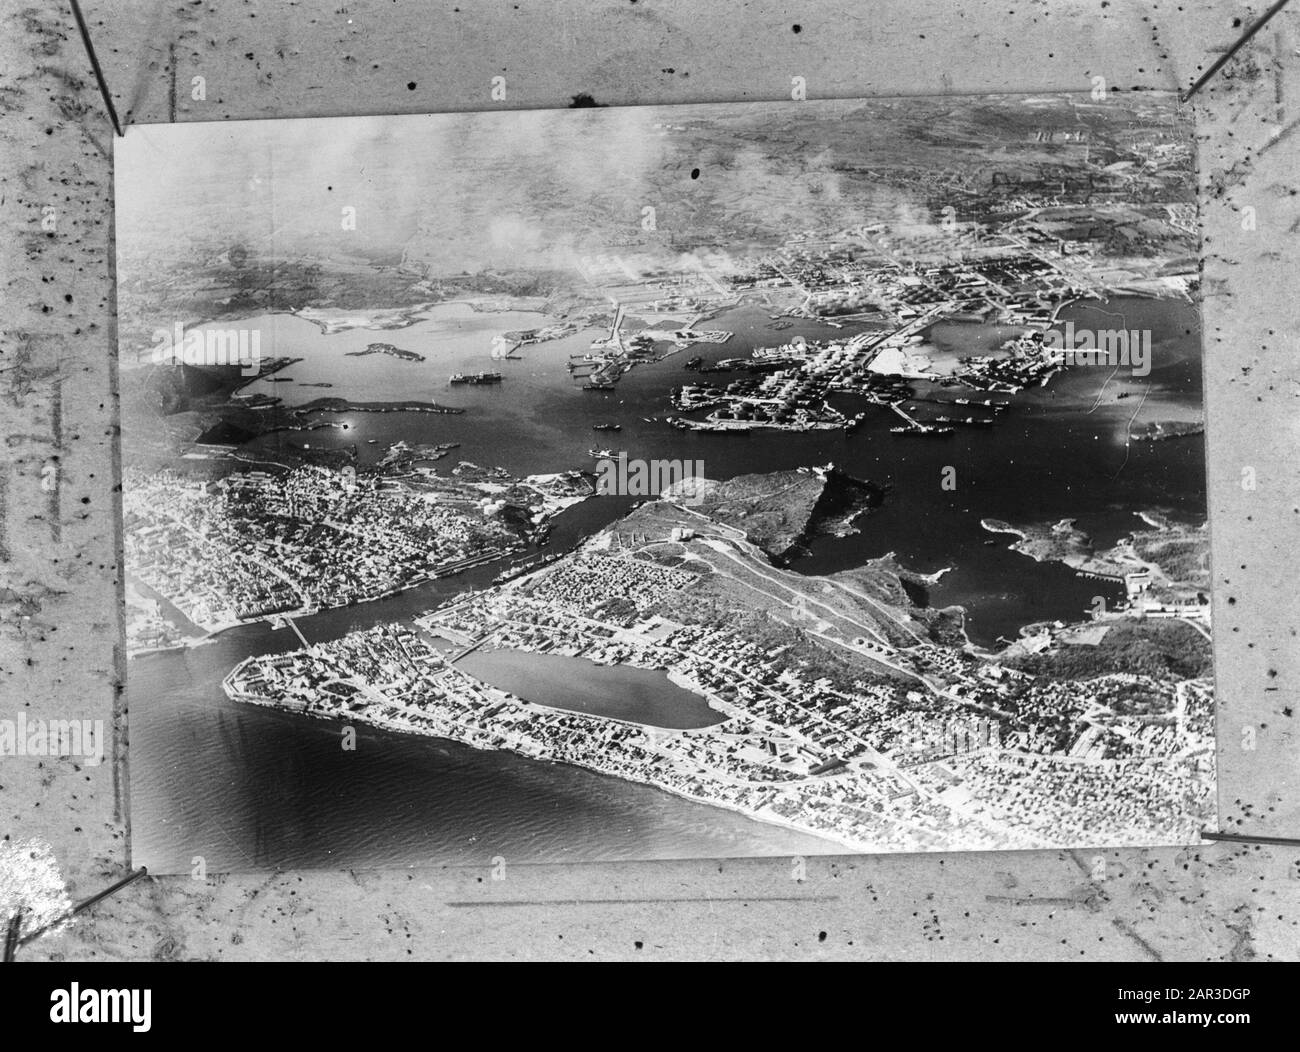 Curacao aerial view Black and White Stock Photos & Images - Alamy